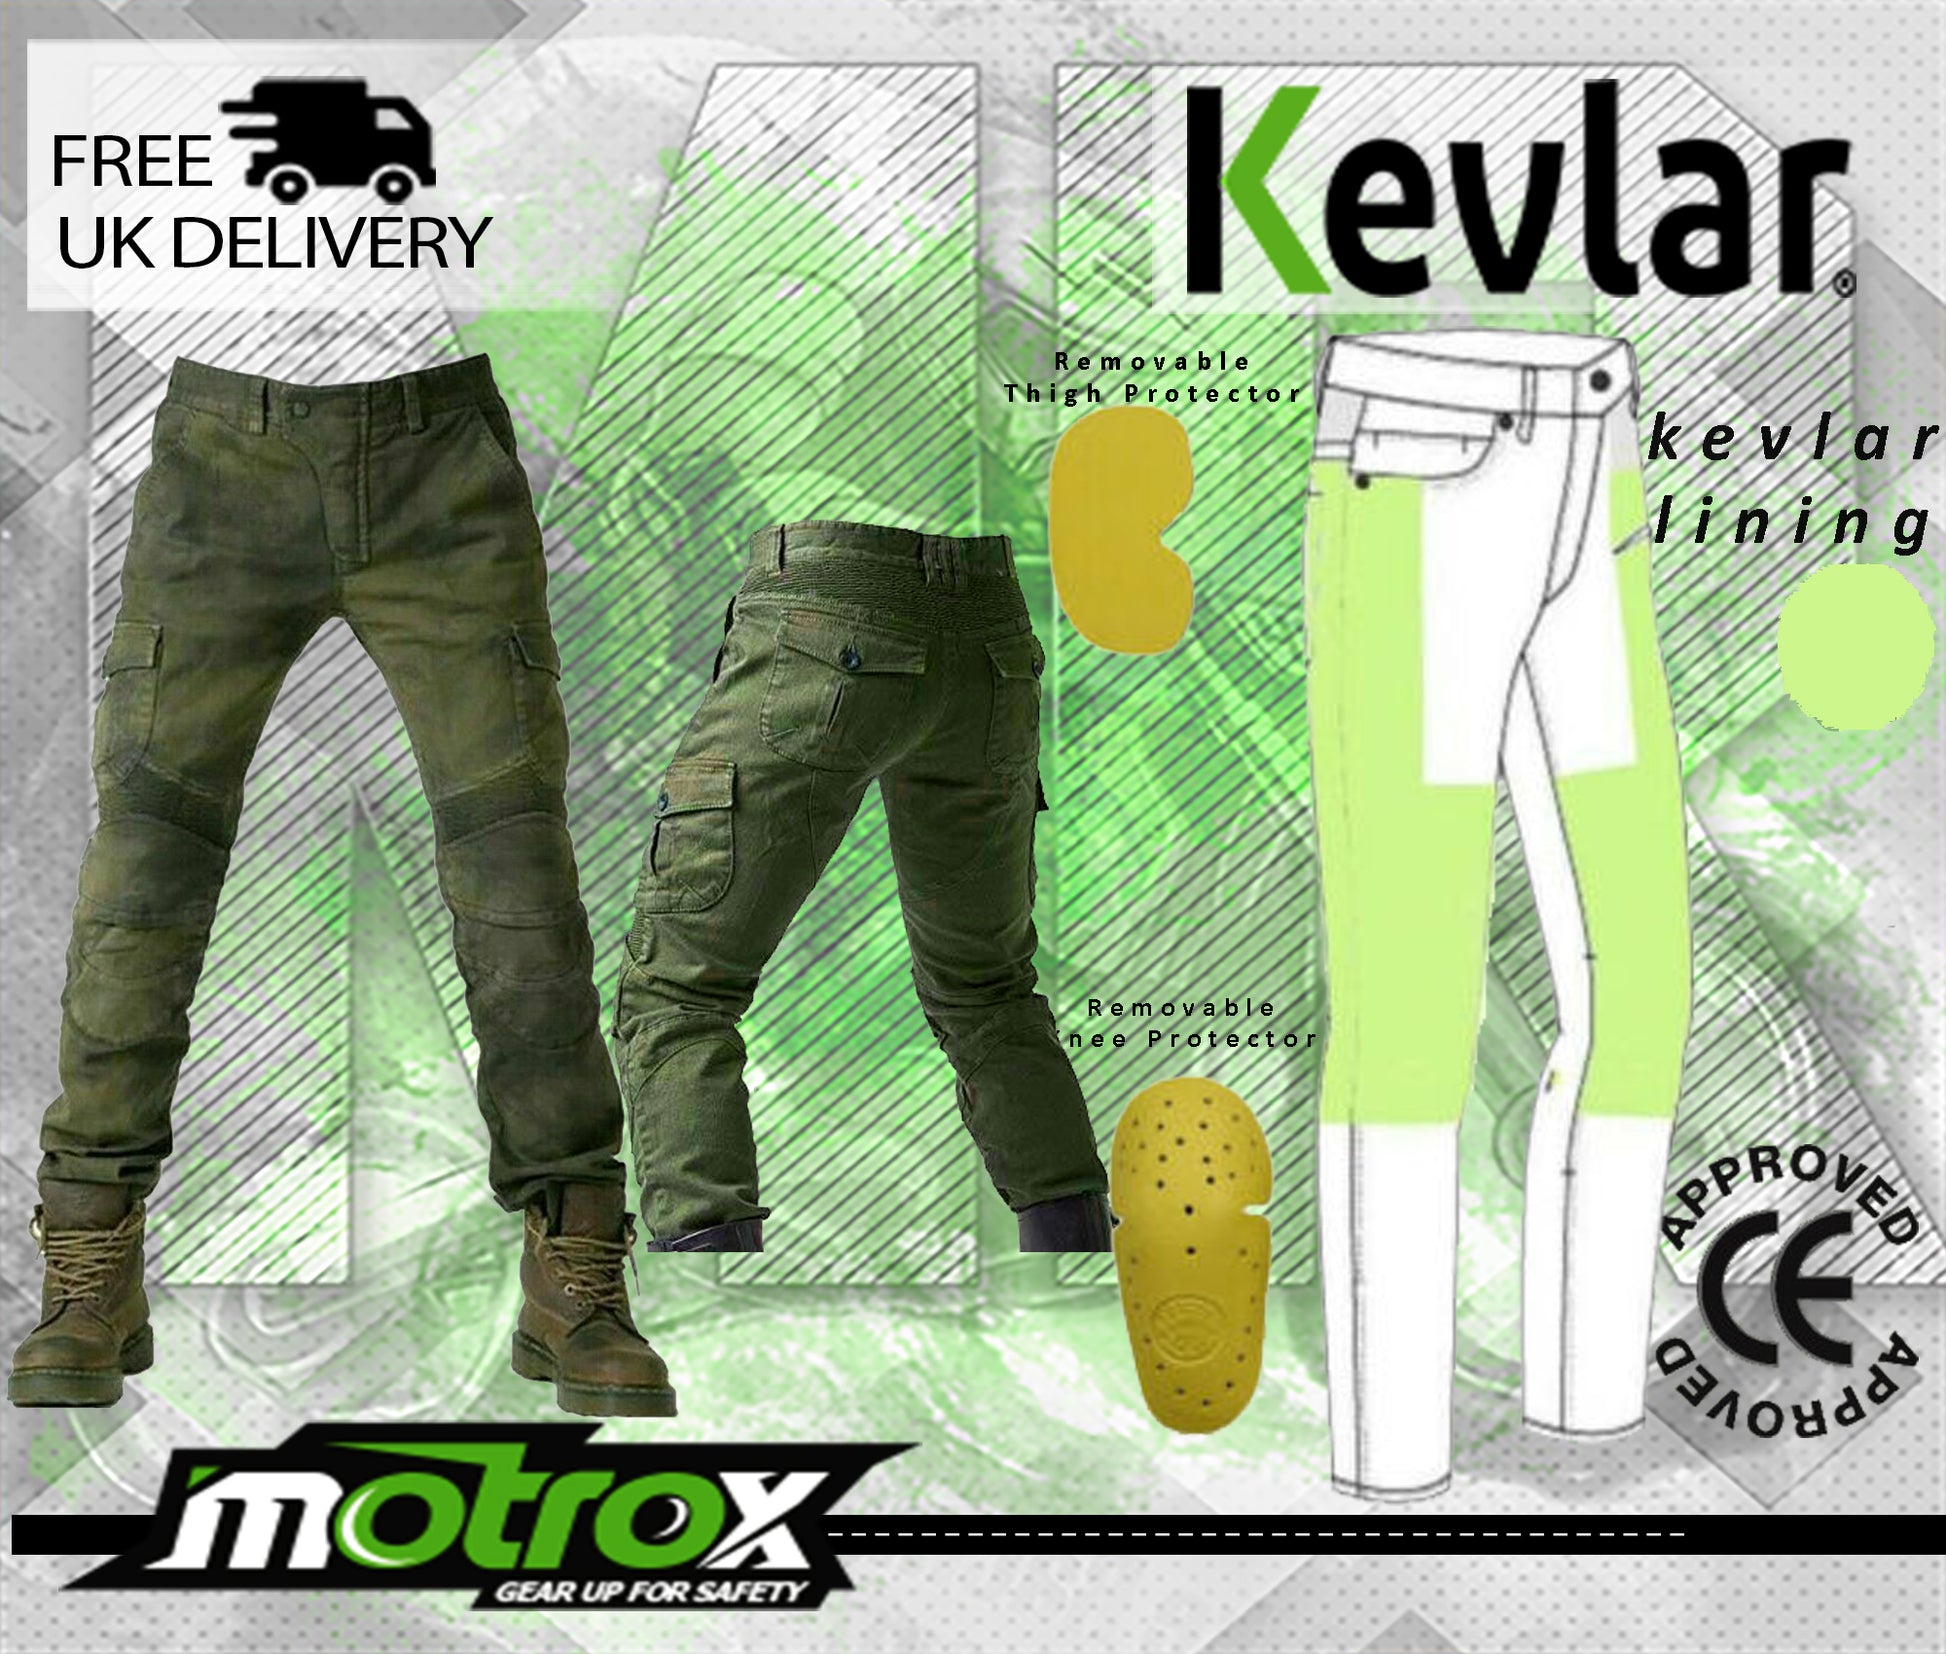 Mens Motorcycle Jeans Motorbike Fully Lined Trouser Made with Kevlar CE  Armour